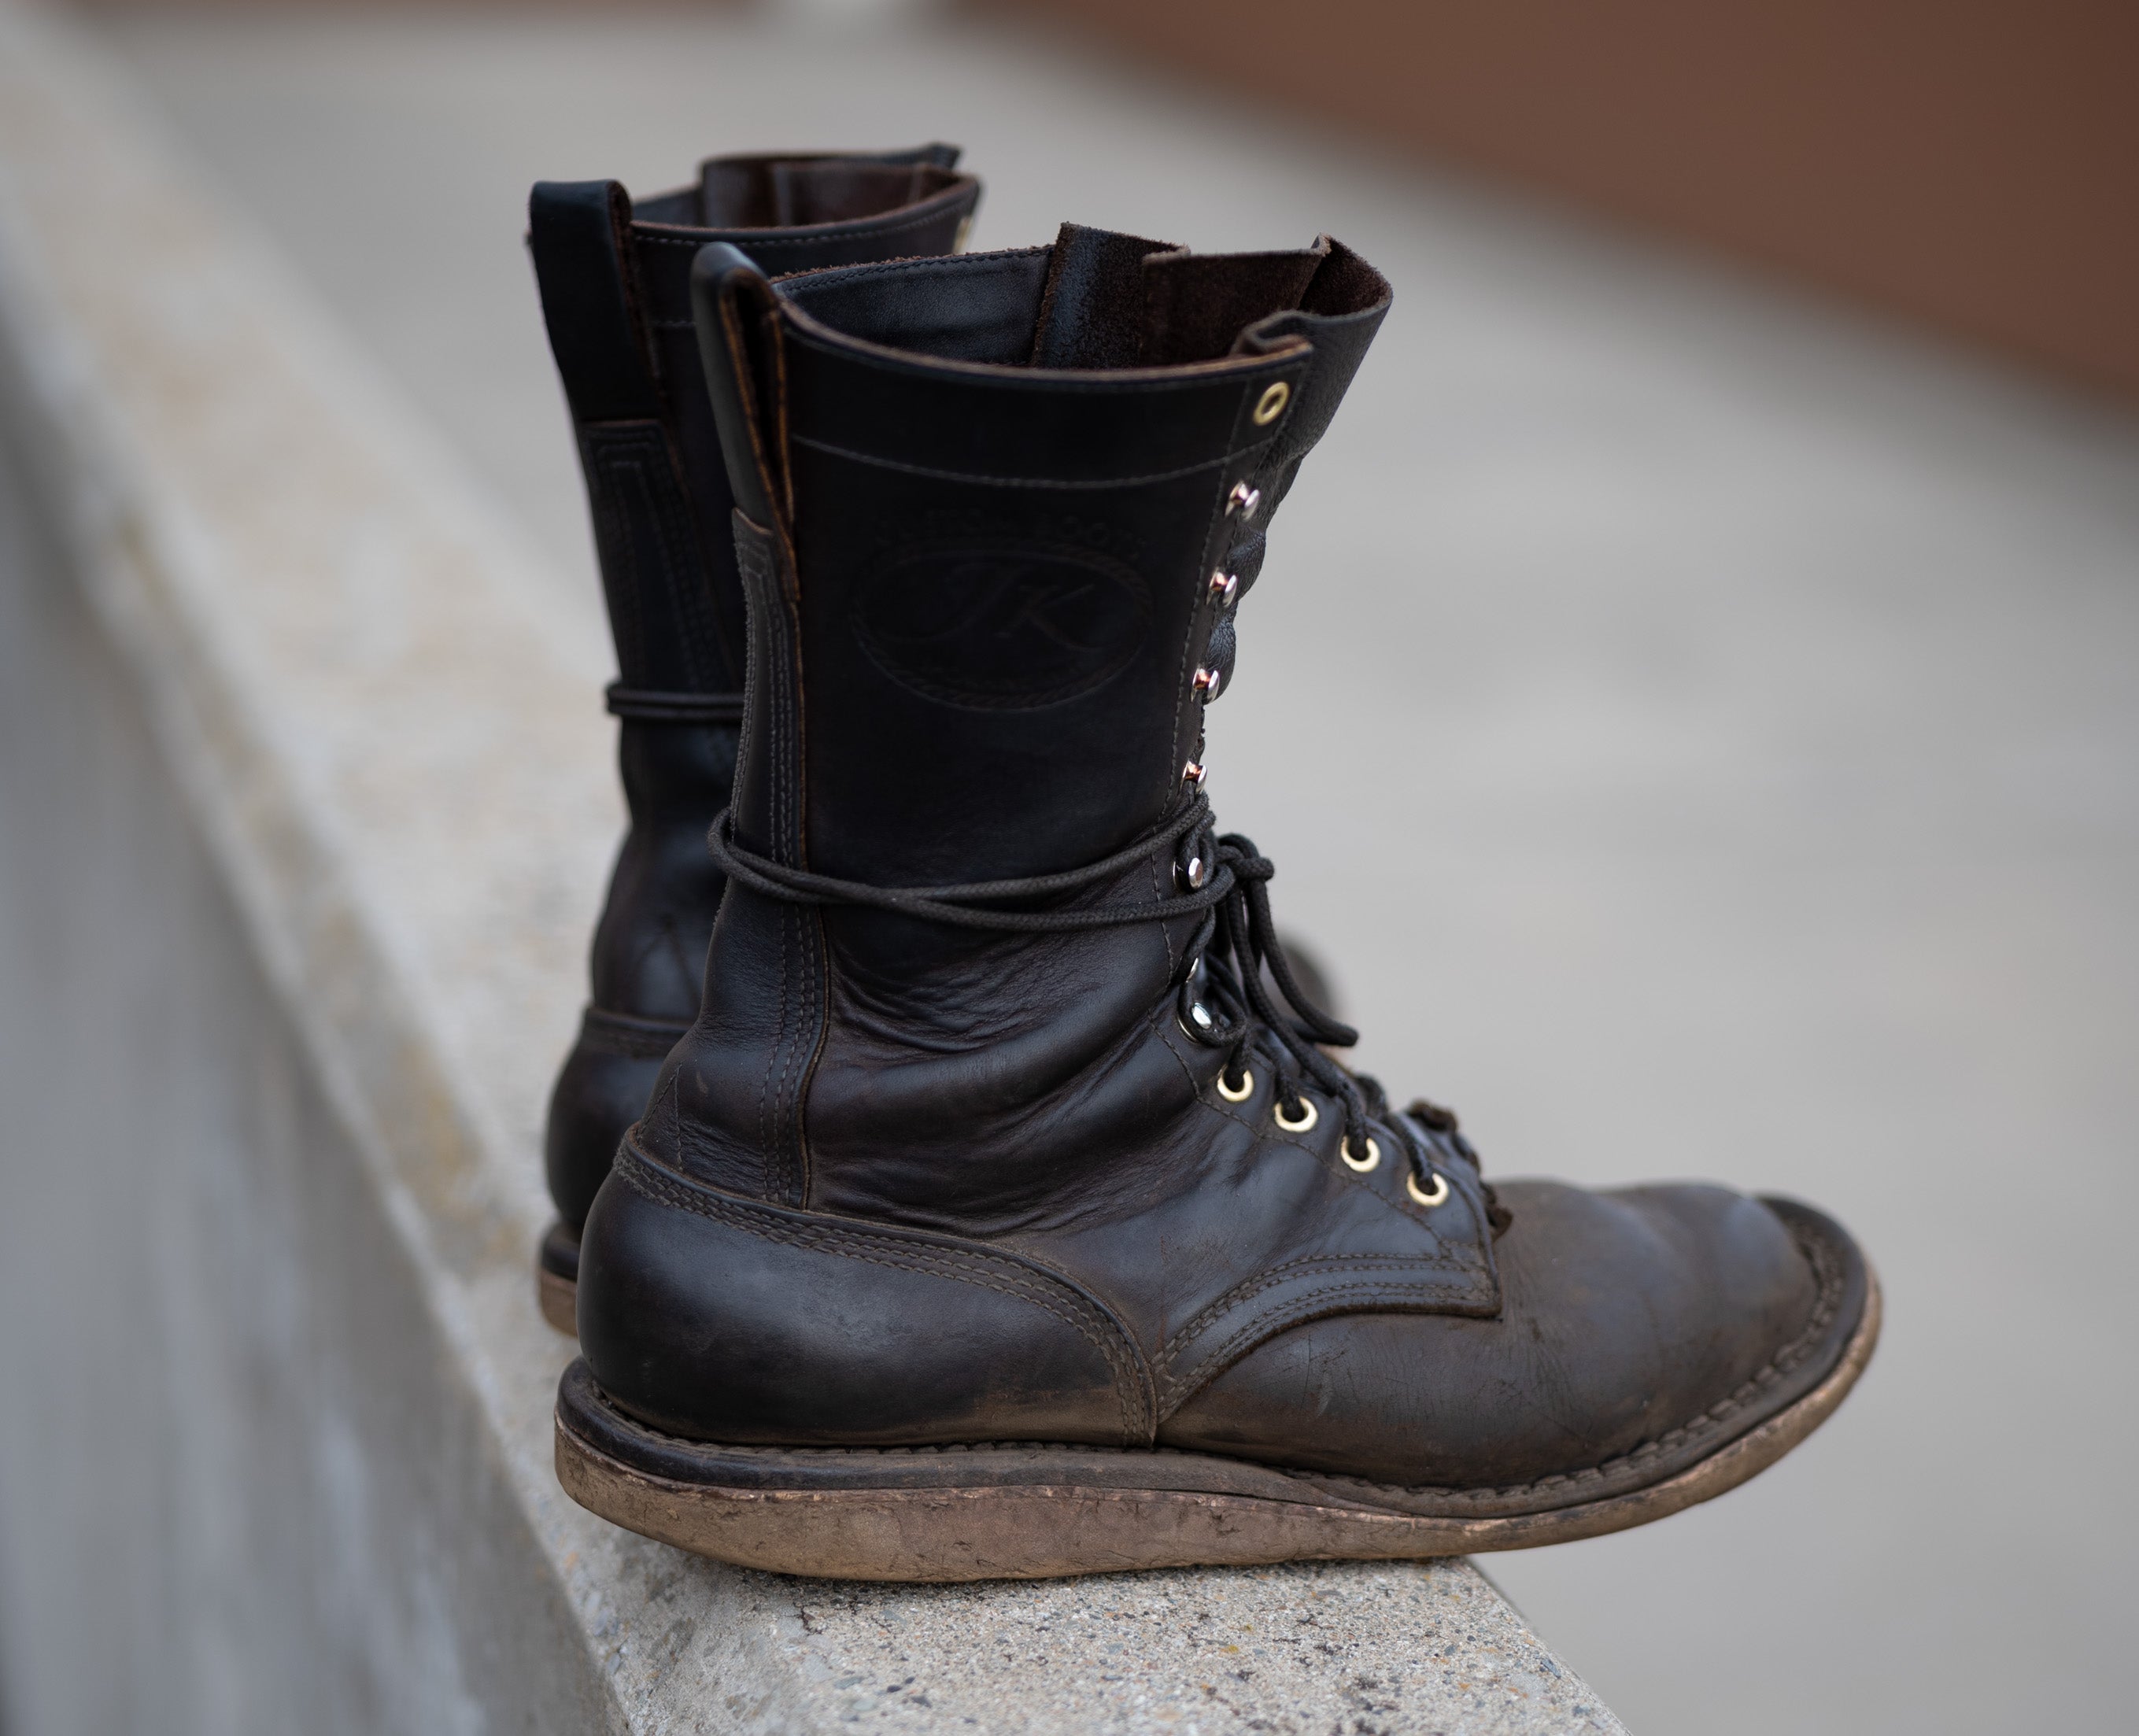 Understanding Oil Tanned Leather – JK Boots